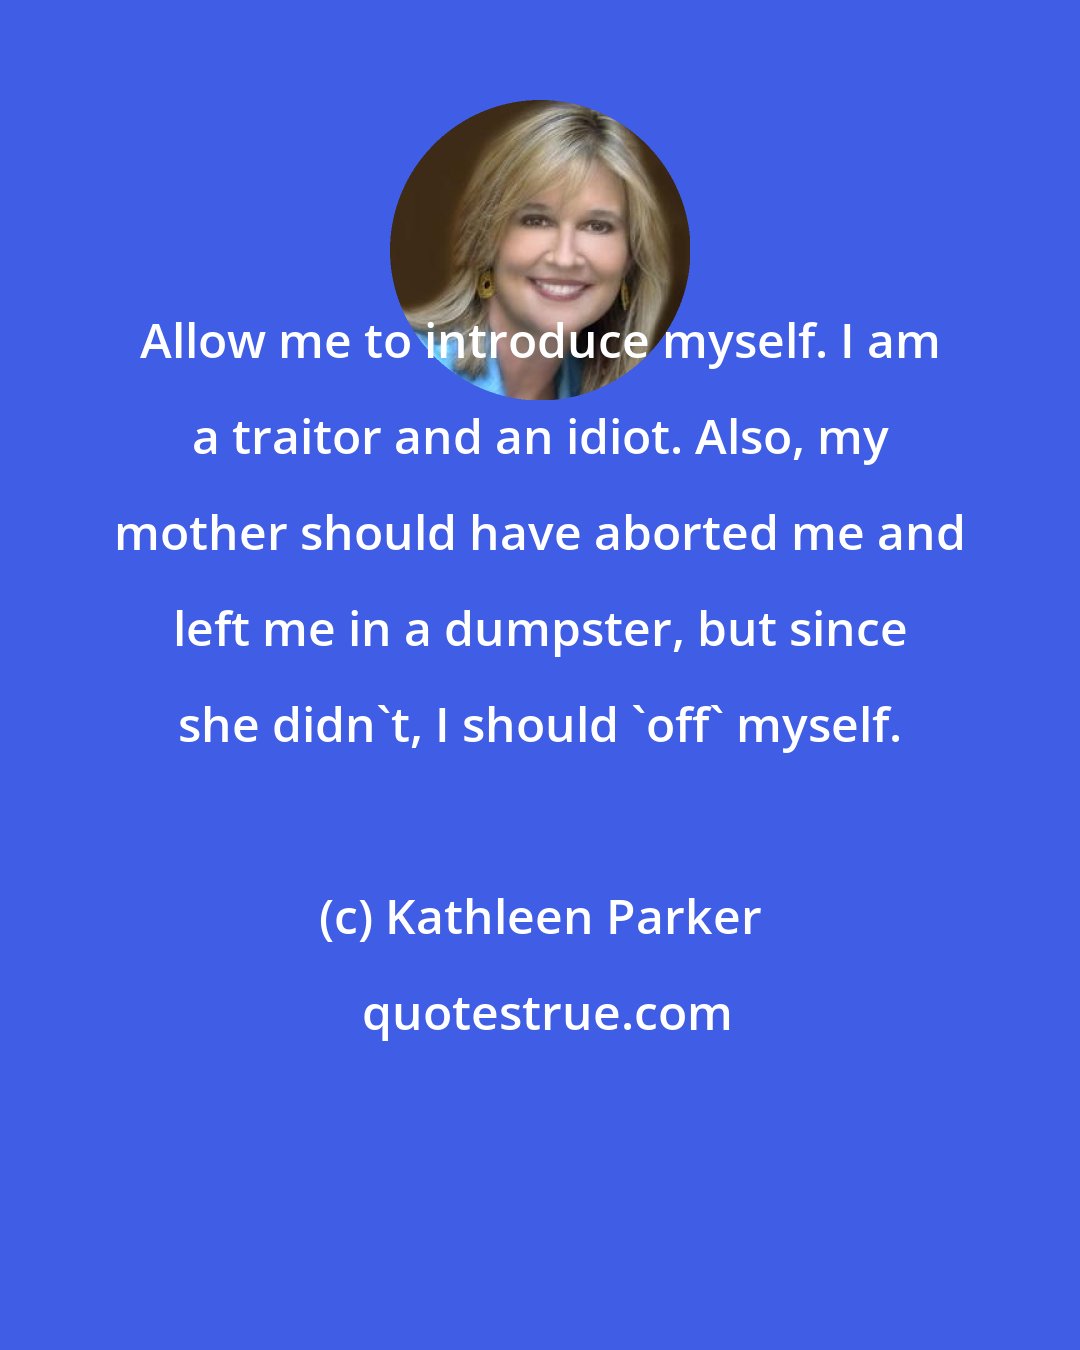 Kathleen Parker: Allow me to introduce myself. I am a traitor and an idiot. Also, my mother should have aborted me and left me in a dumpster, but since she didn't, I should 'off' myself.